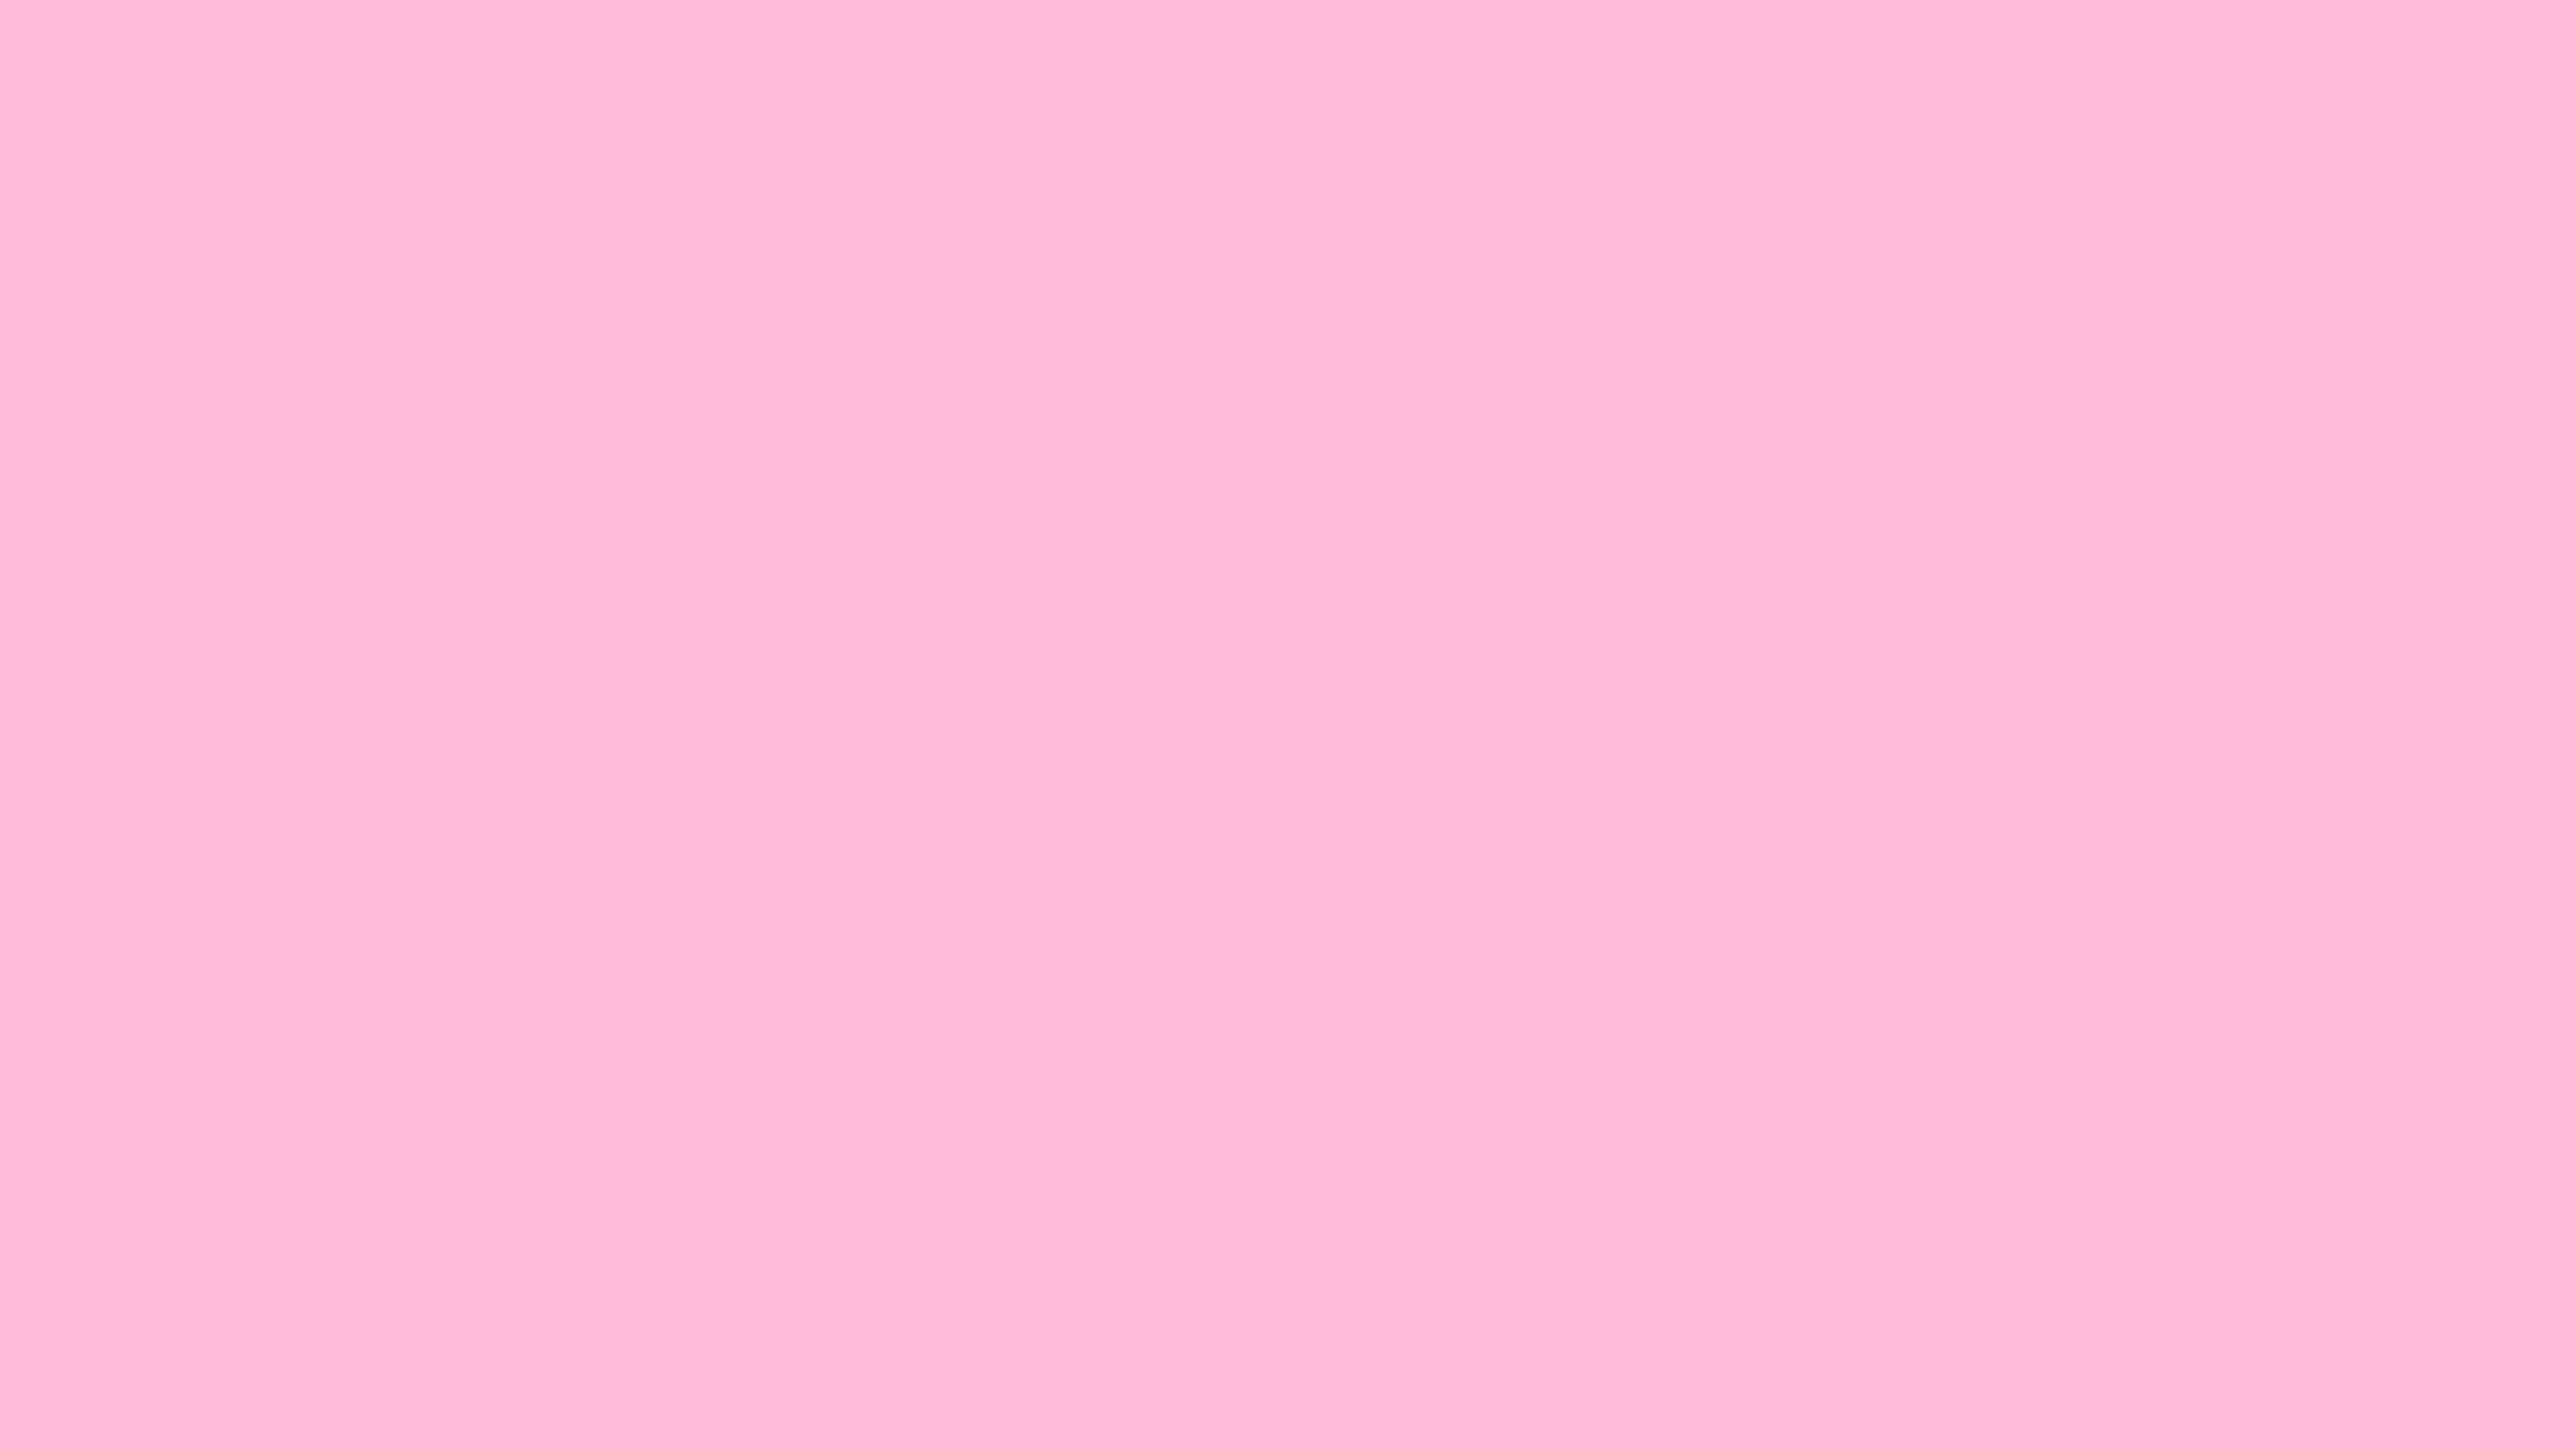 7680x4320 Cotton Candy Solid Color Background